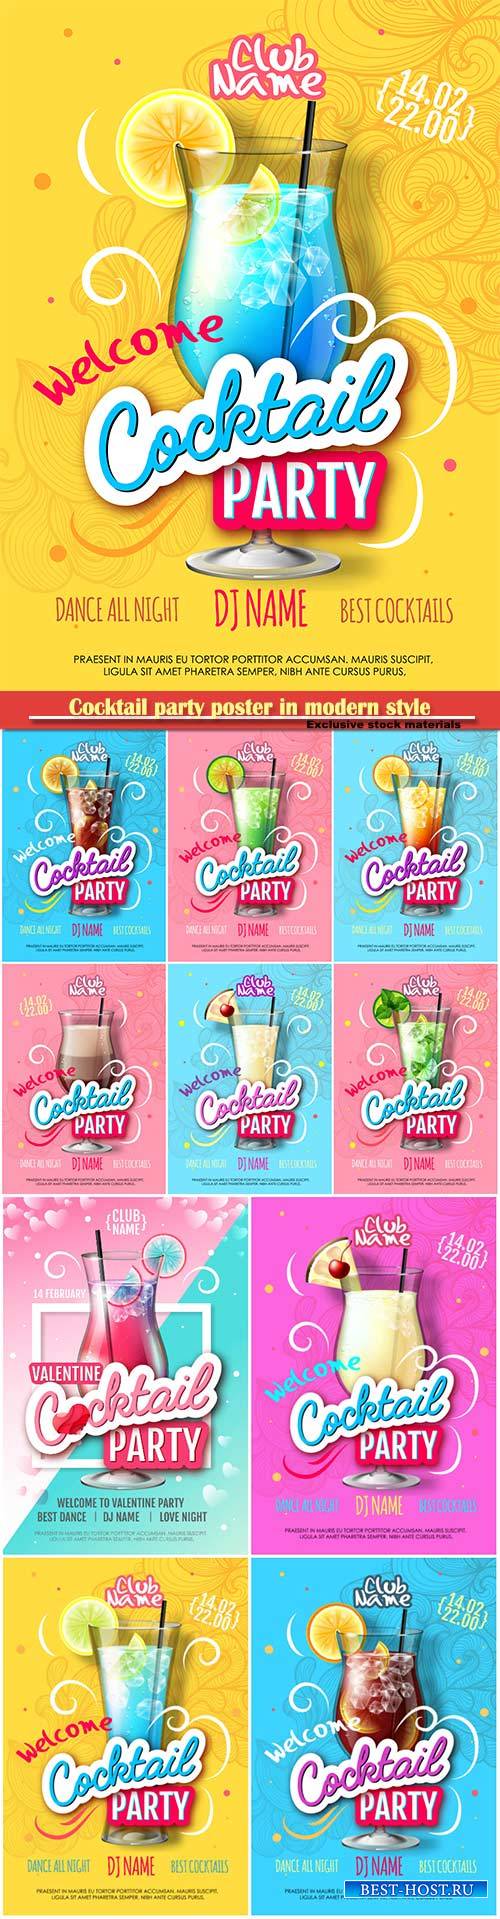 Cocktail party poster in modern style, realistic cocktail vector illustrati ...